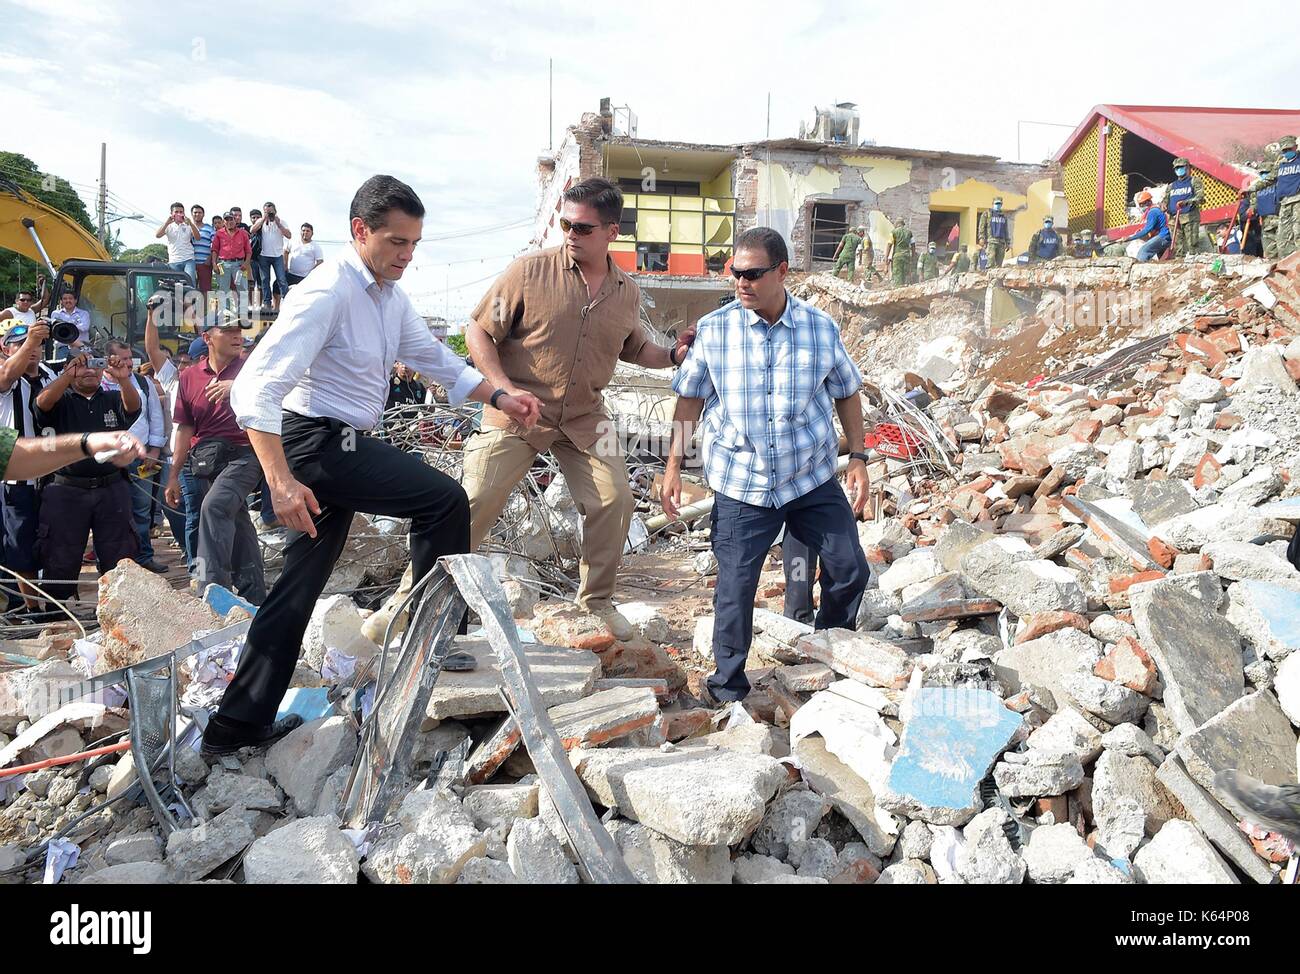 Mexican President Enrique Pena Nieto climbs over rubble to view a destroyed school caused by an earthquake during a visit to the coastal town closest to the epicenter September 9, 2017 in Juchitán, Oaxaca, Mexico. The massive 8.2-magnitude quake struck off the southern Pacific coast of Chiapas killing at least 60 people and leveling areas in some southern states. Stock Photo